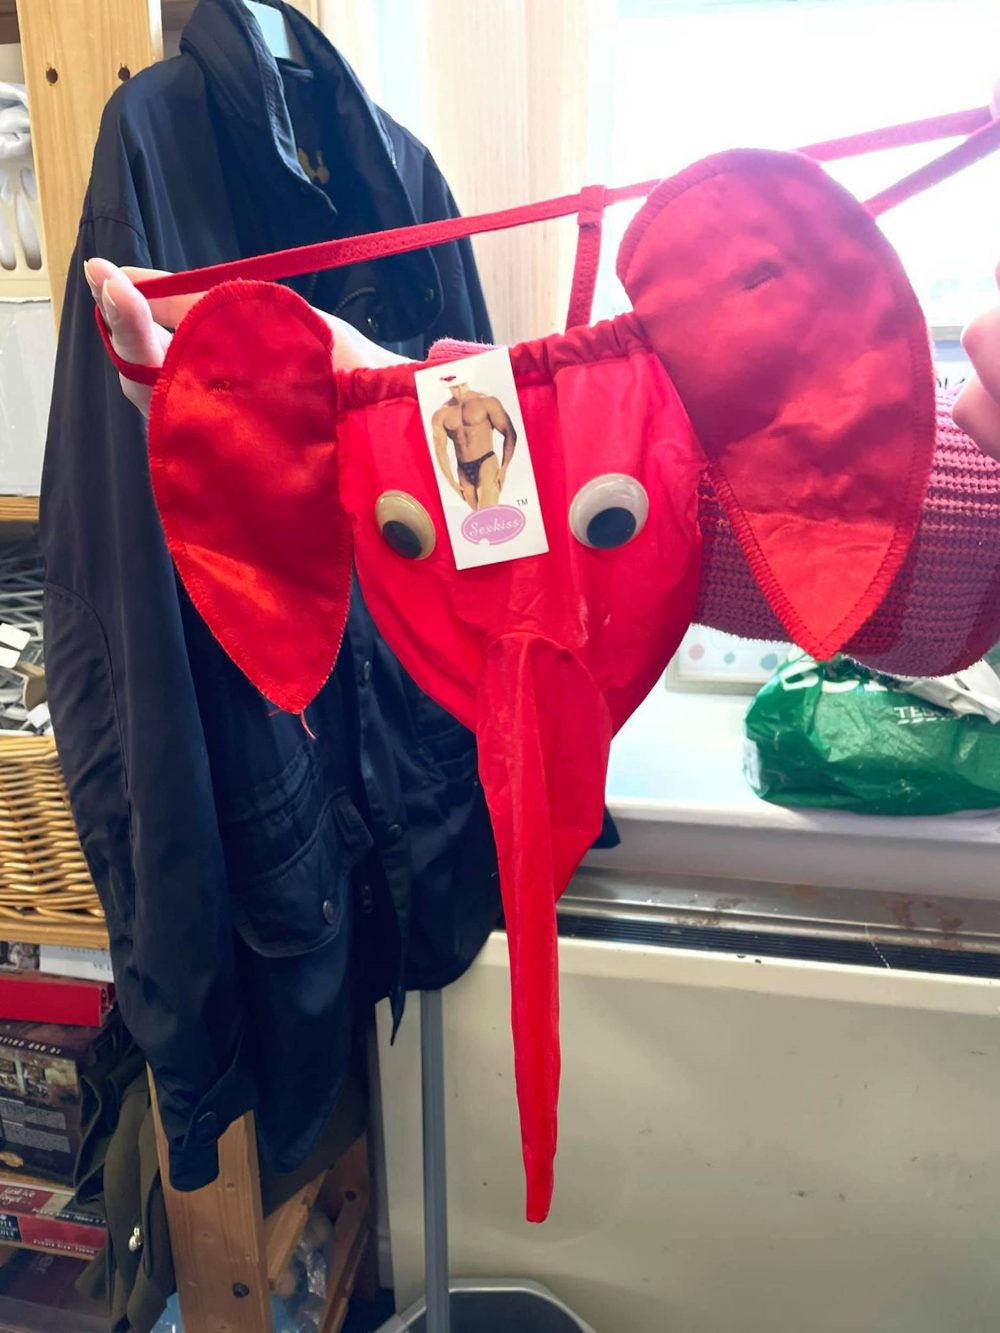 Bizarre “elephant underwear thong G-string” donated to charity shop